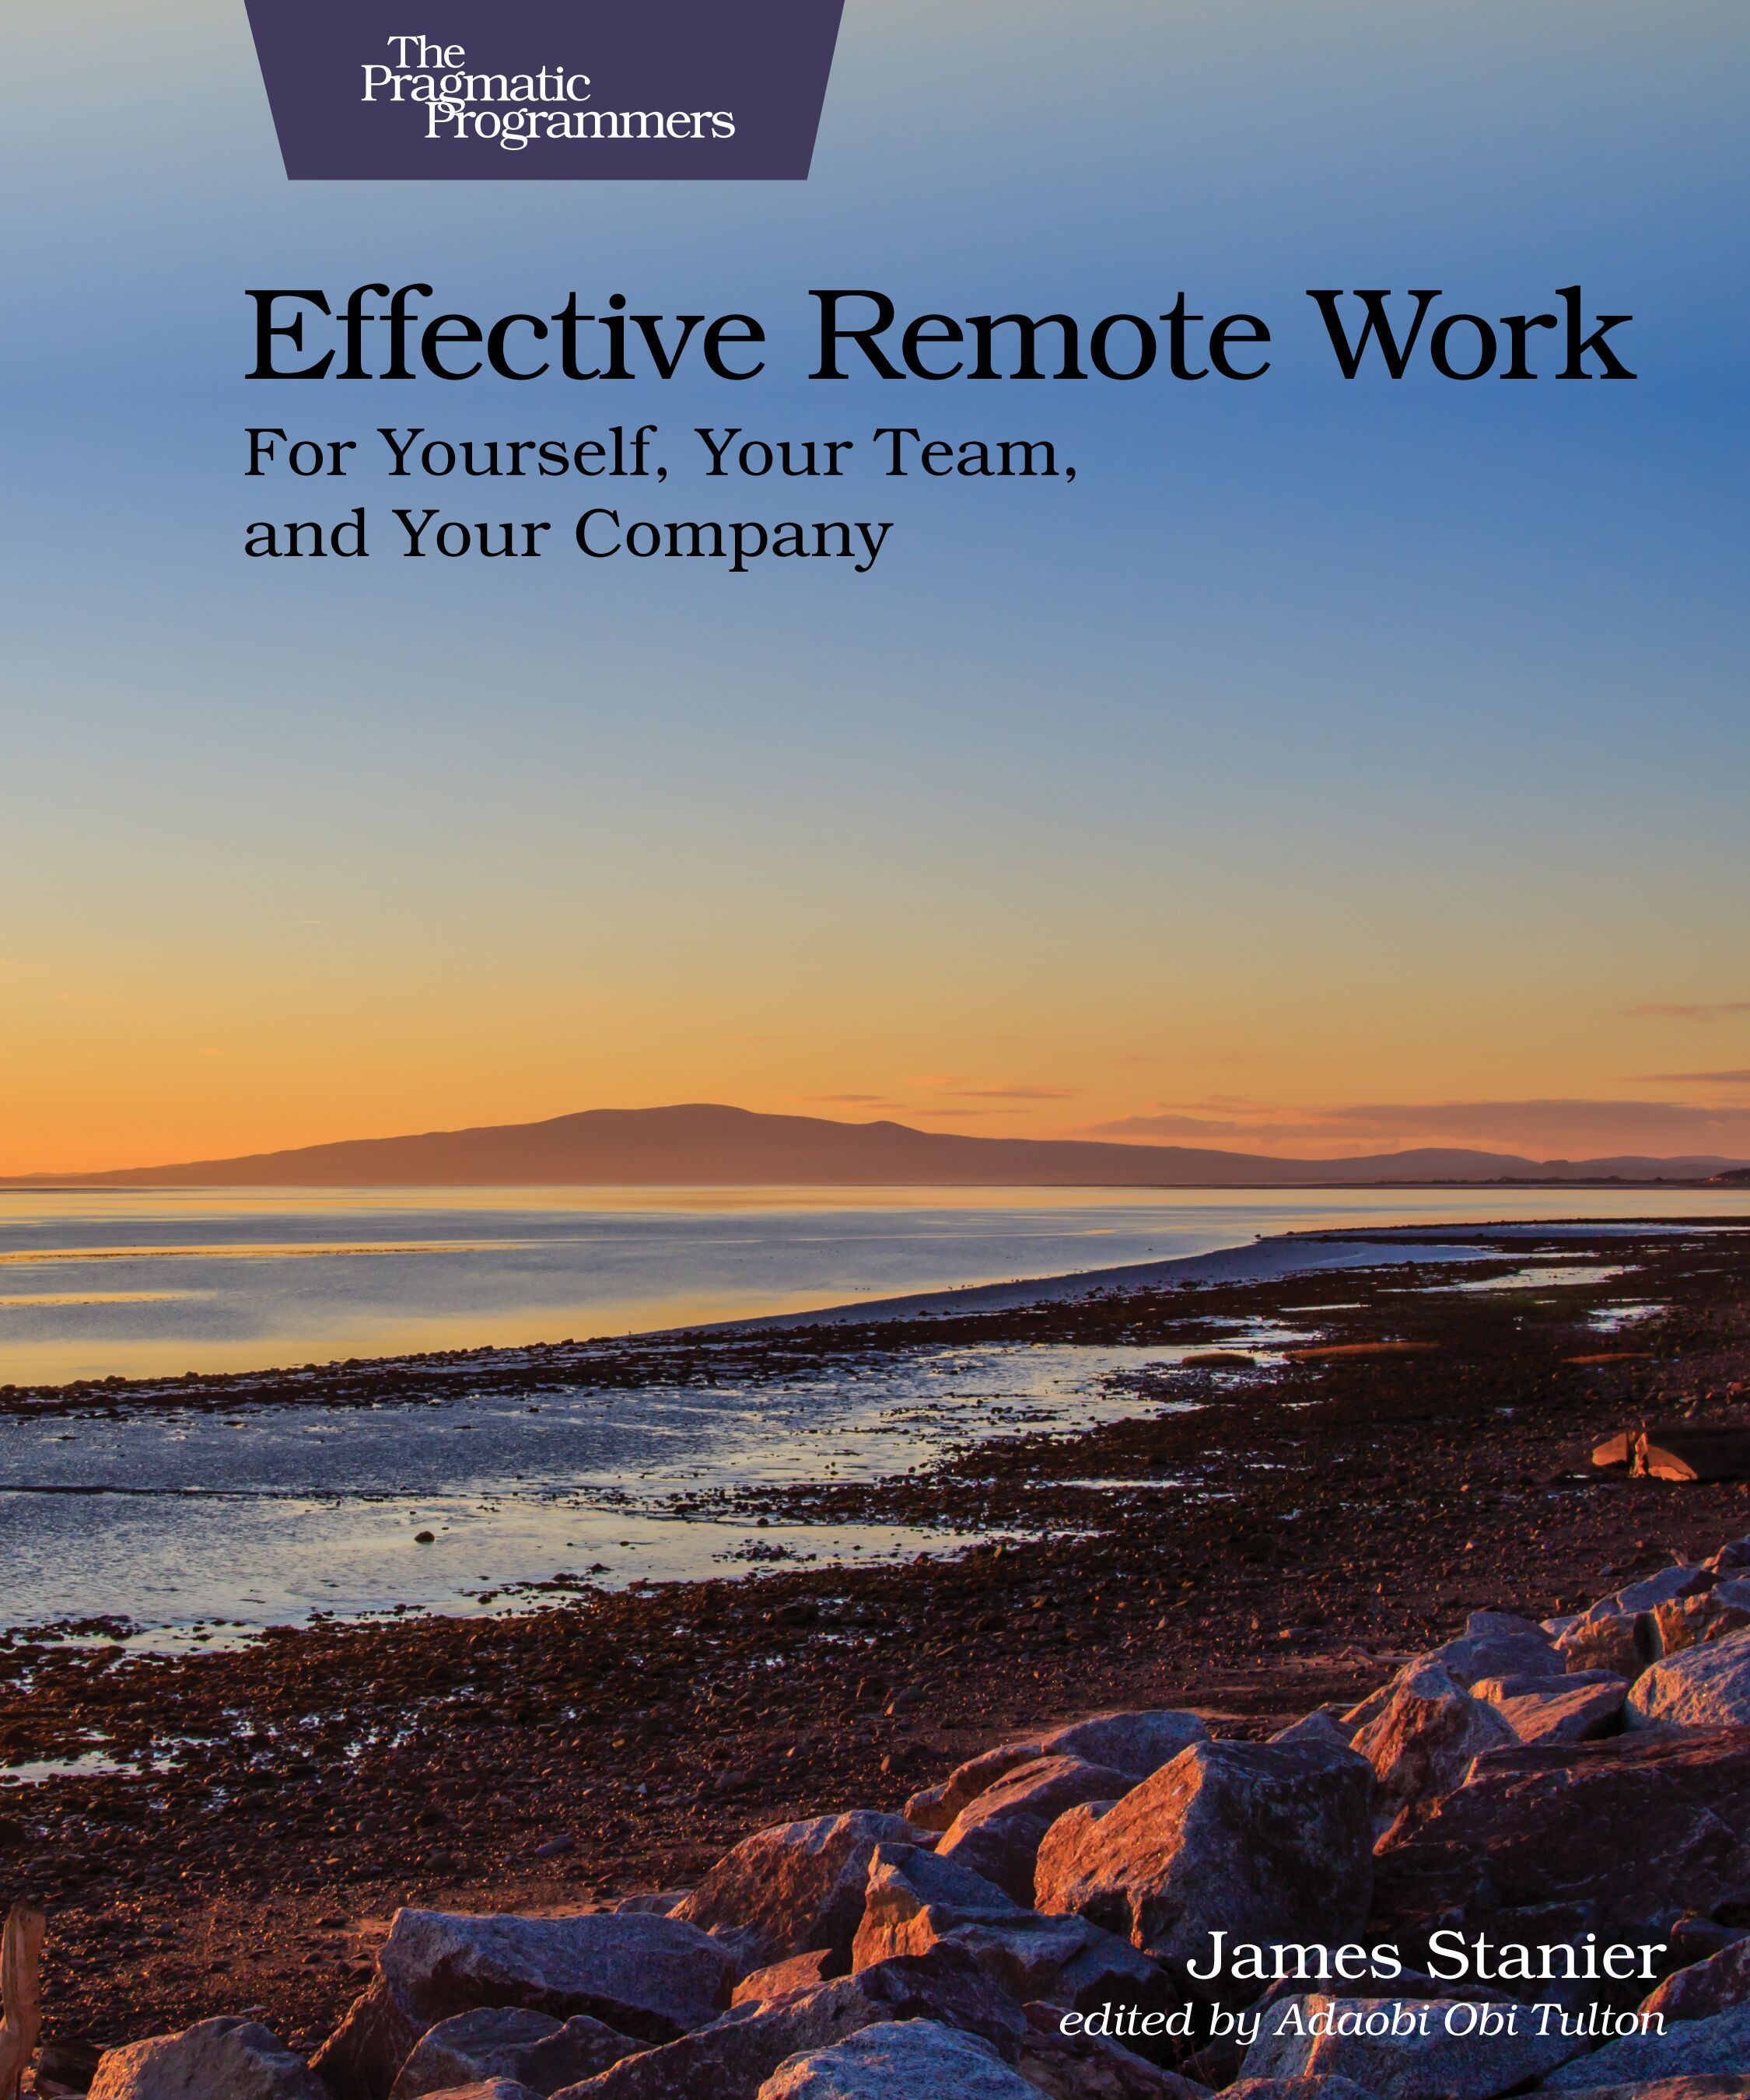 Effective Remote Work. For Yourself, Your Team, and Your Company